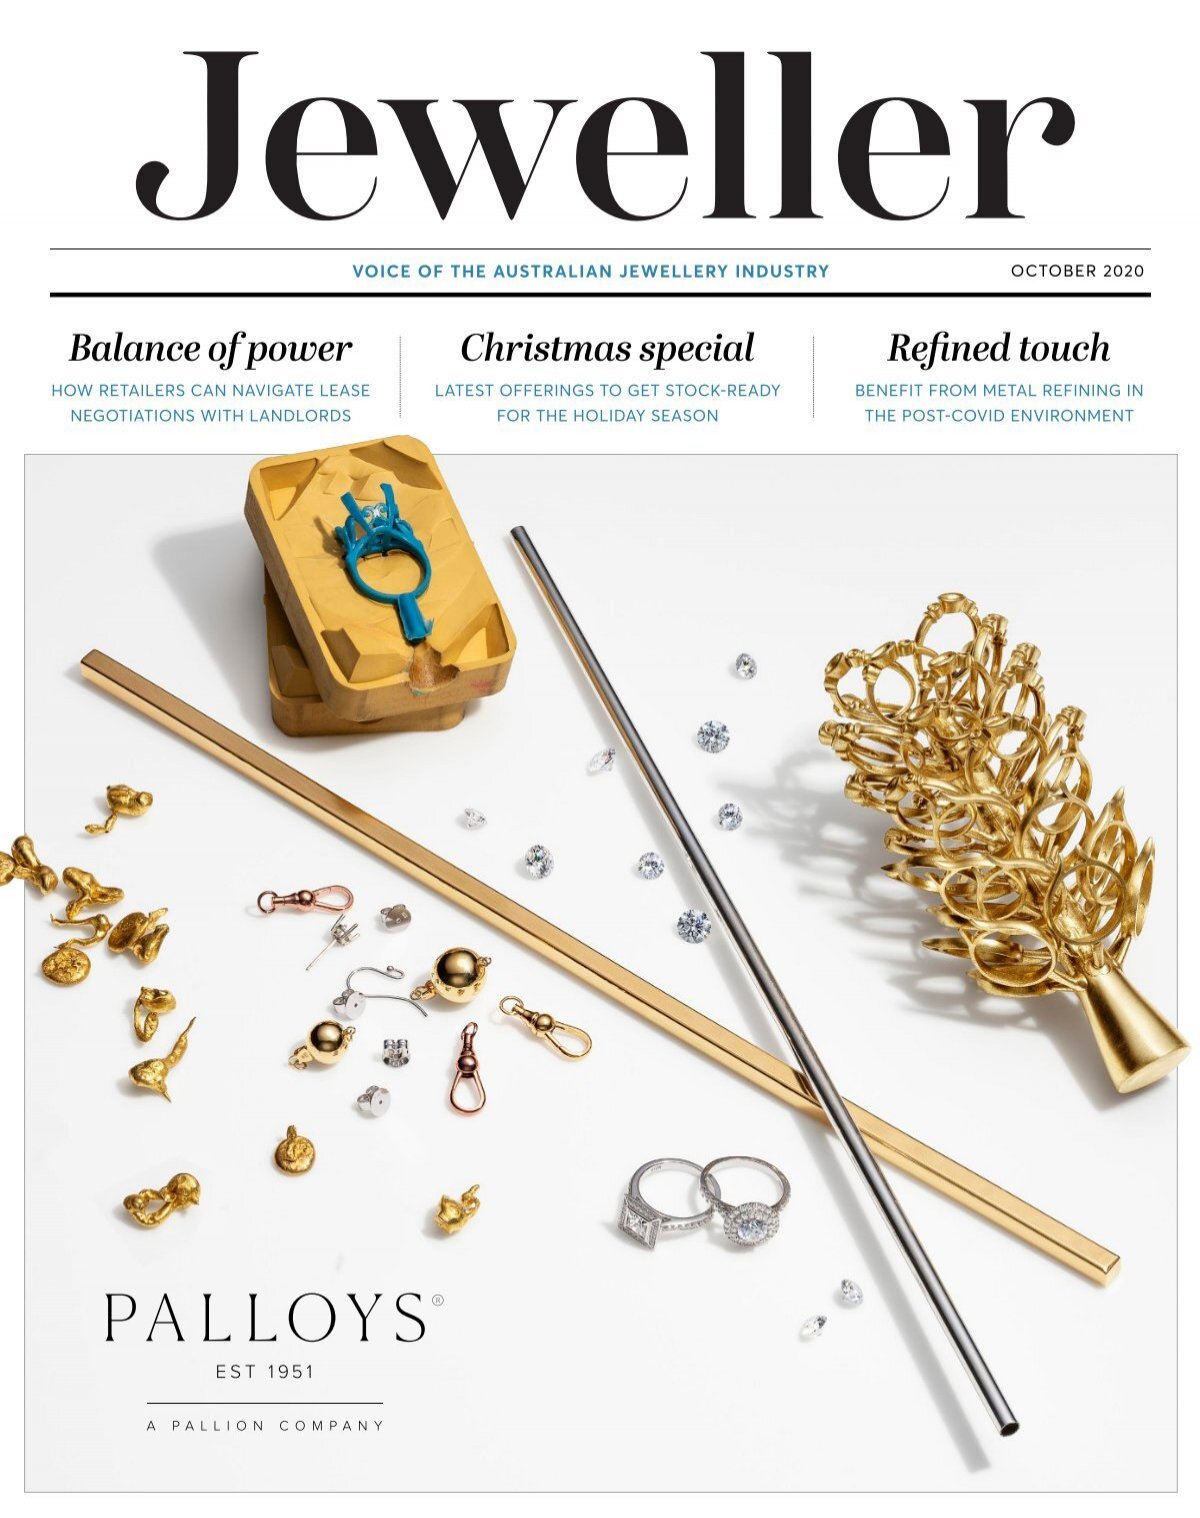 Big spending on jewellery through pandemic justifies Lovisa's aggressive  global expansion - The Sentiment